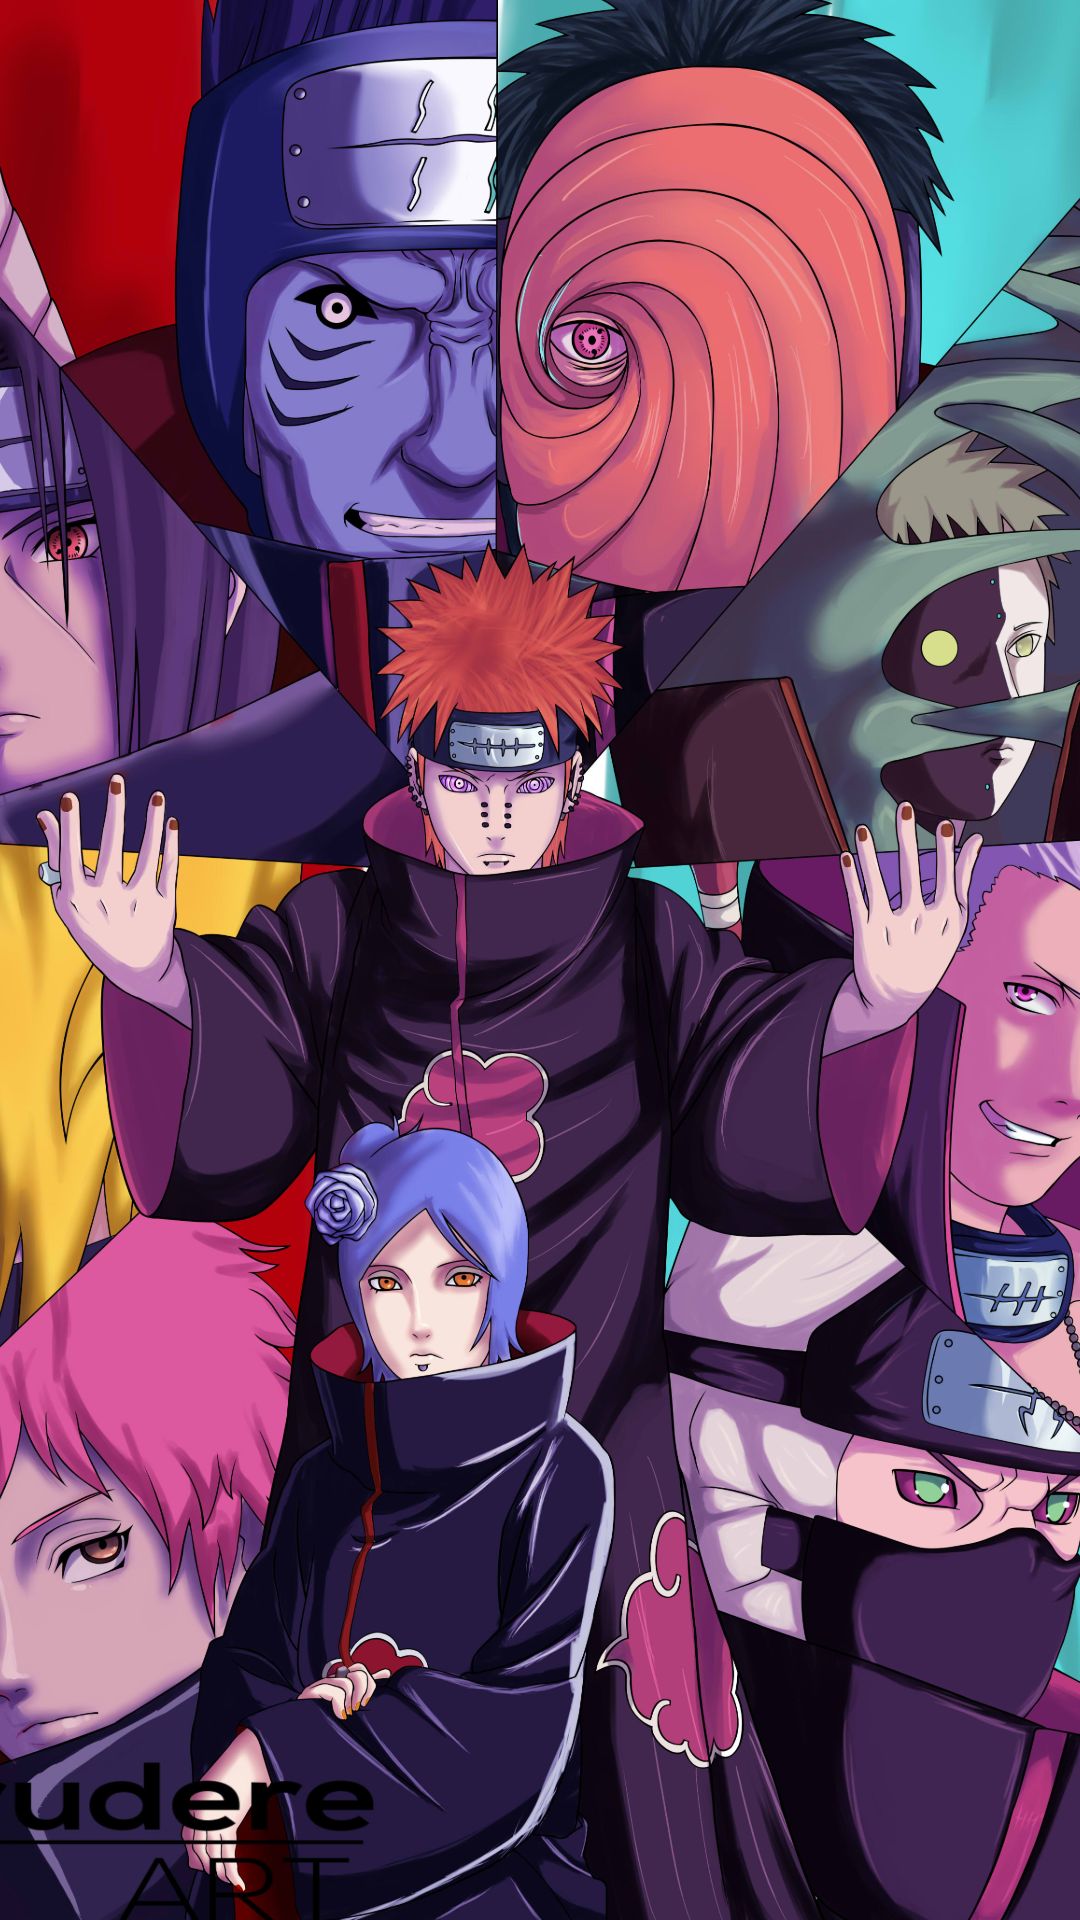 Download Akatsuki Wallpaper for free, use for mobile and desktop